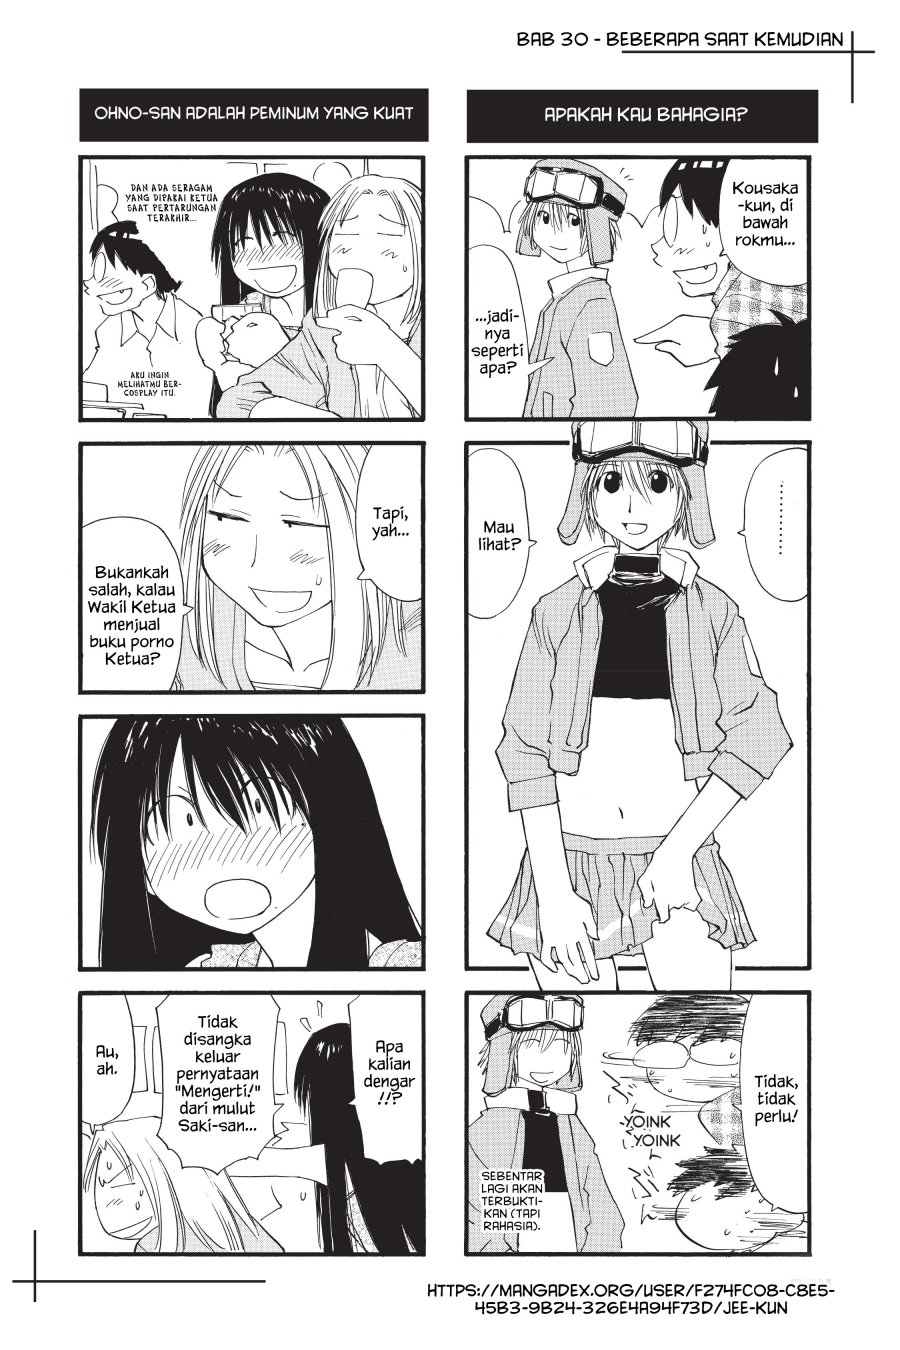 Genshiken – The Society for the Study of Modern Visual Culture Chapter 30 Image 25